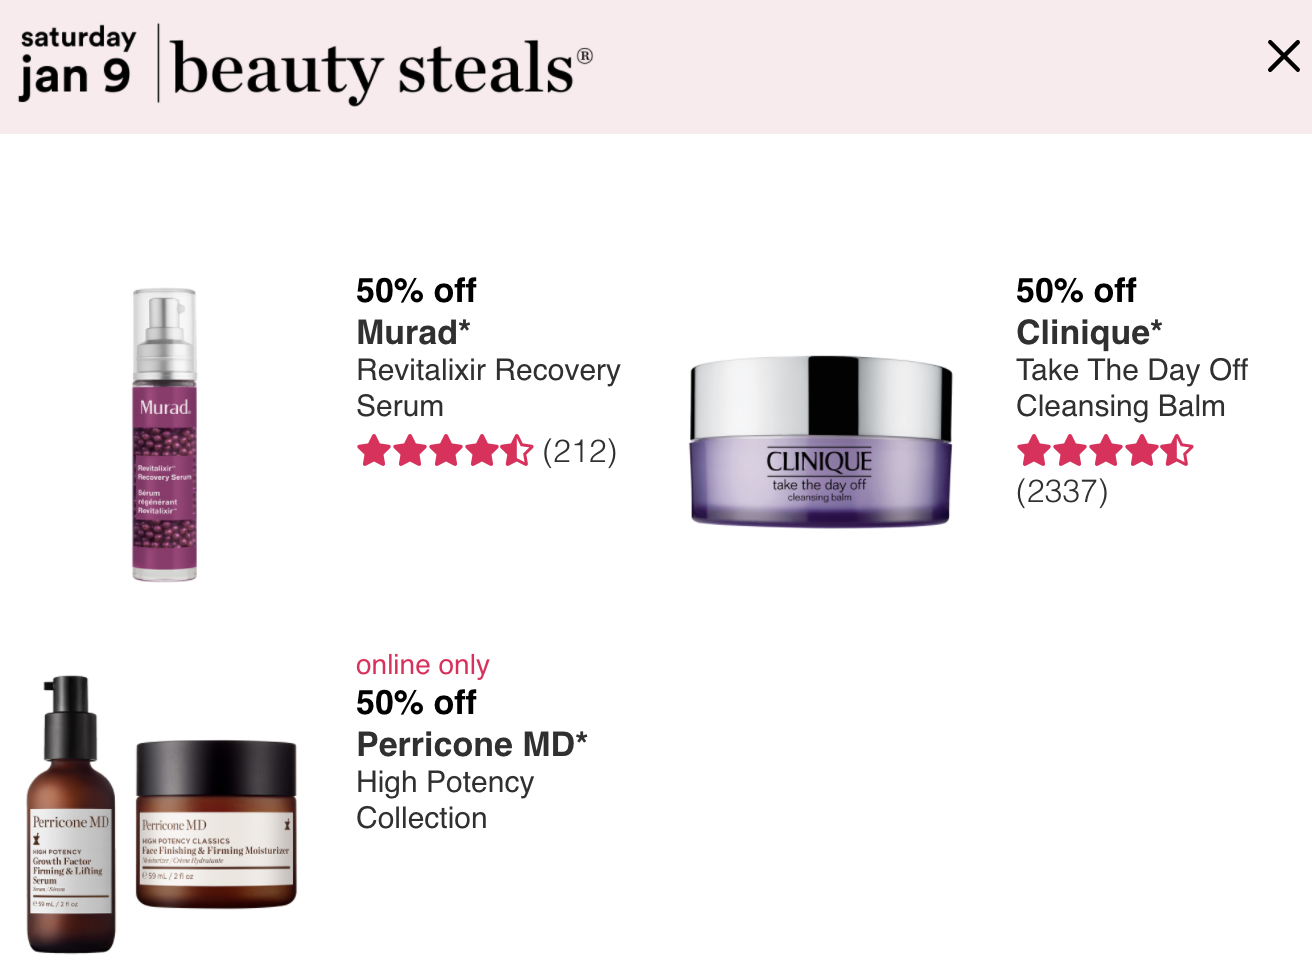 Ulta: Love Your Skin Event - Day 7(tomorrow 1/9) - Gift With Purchase